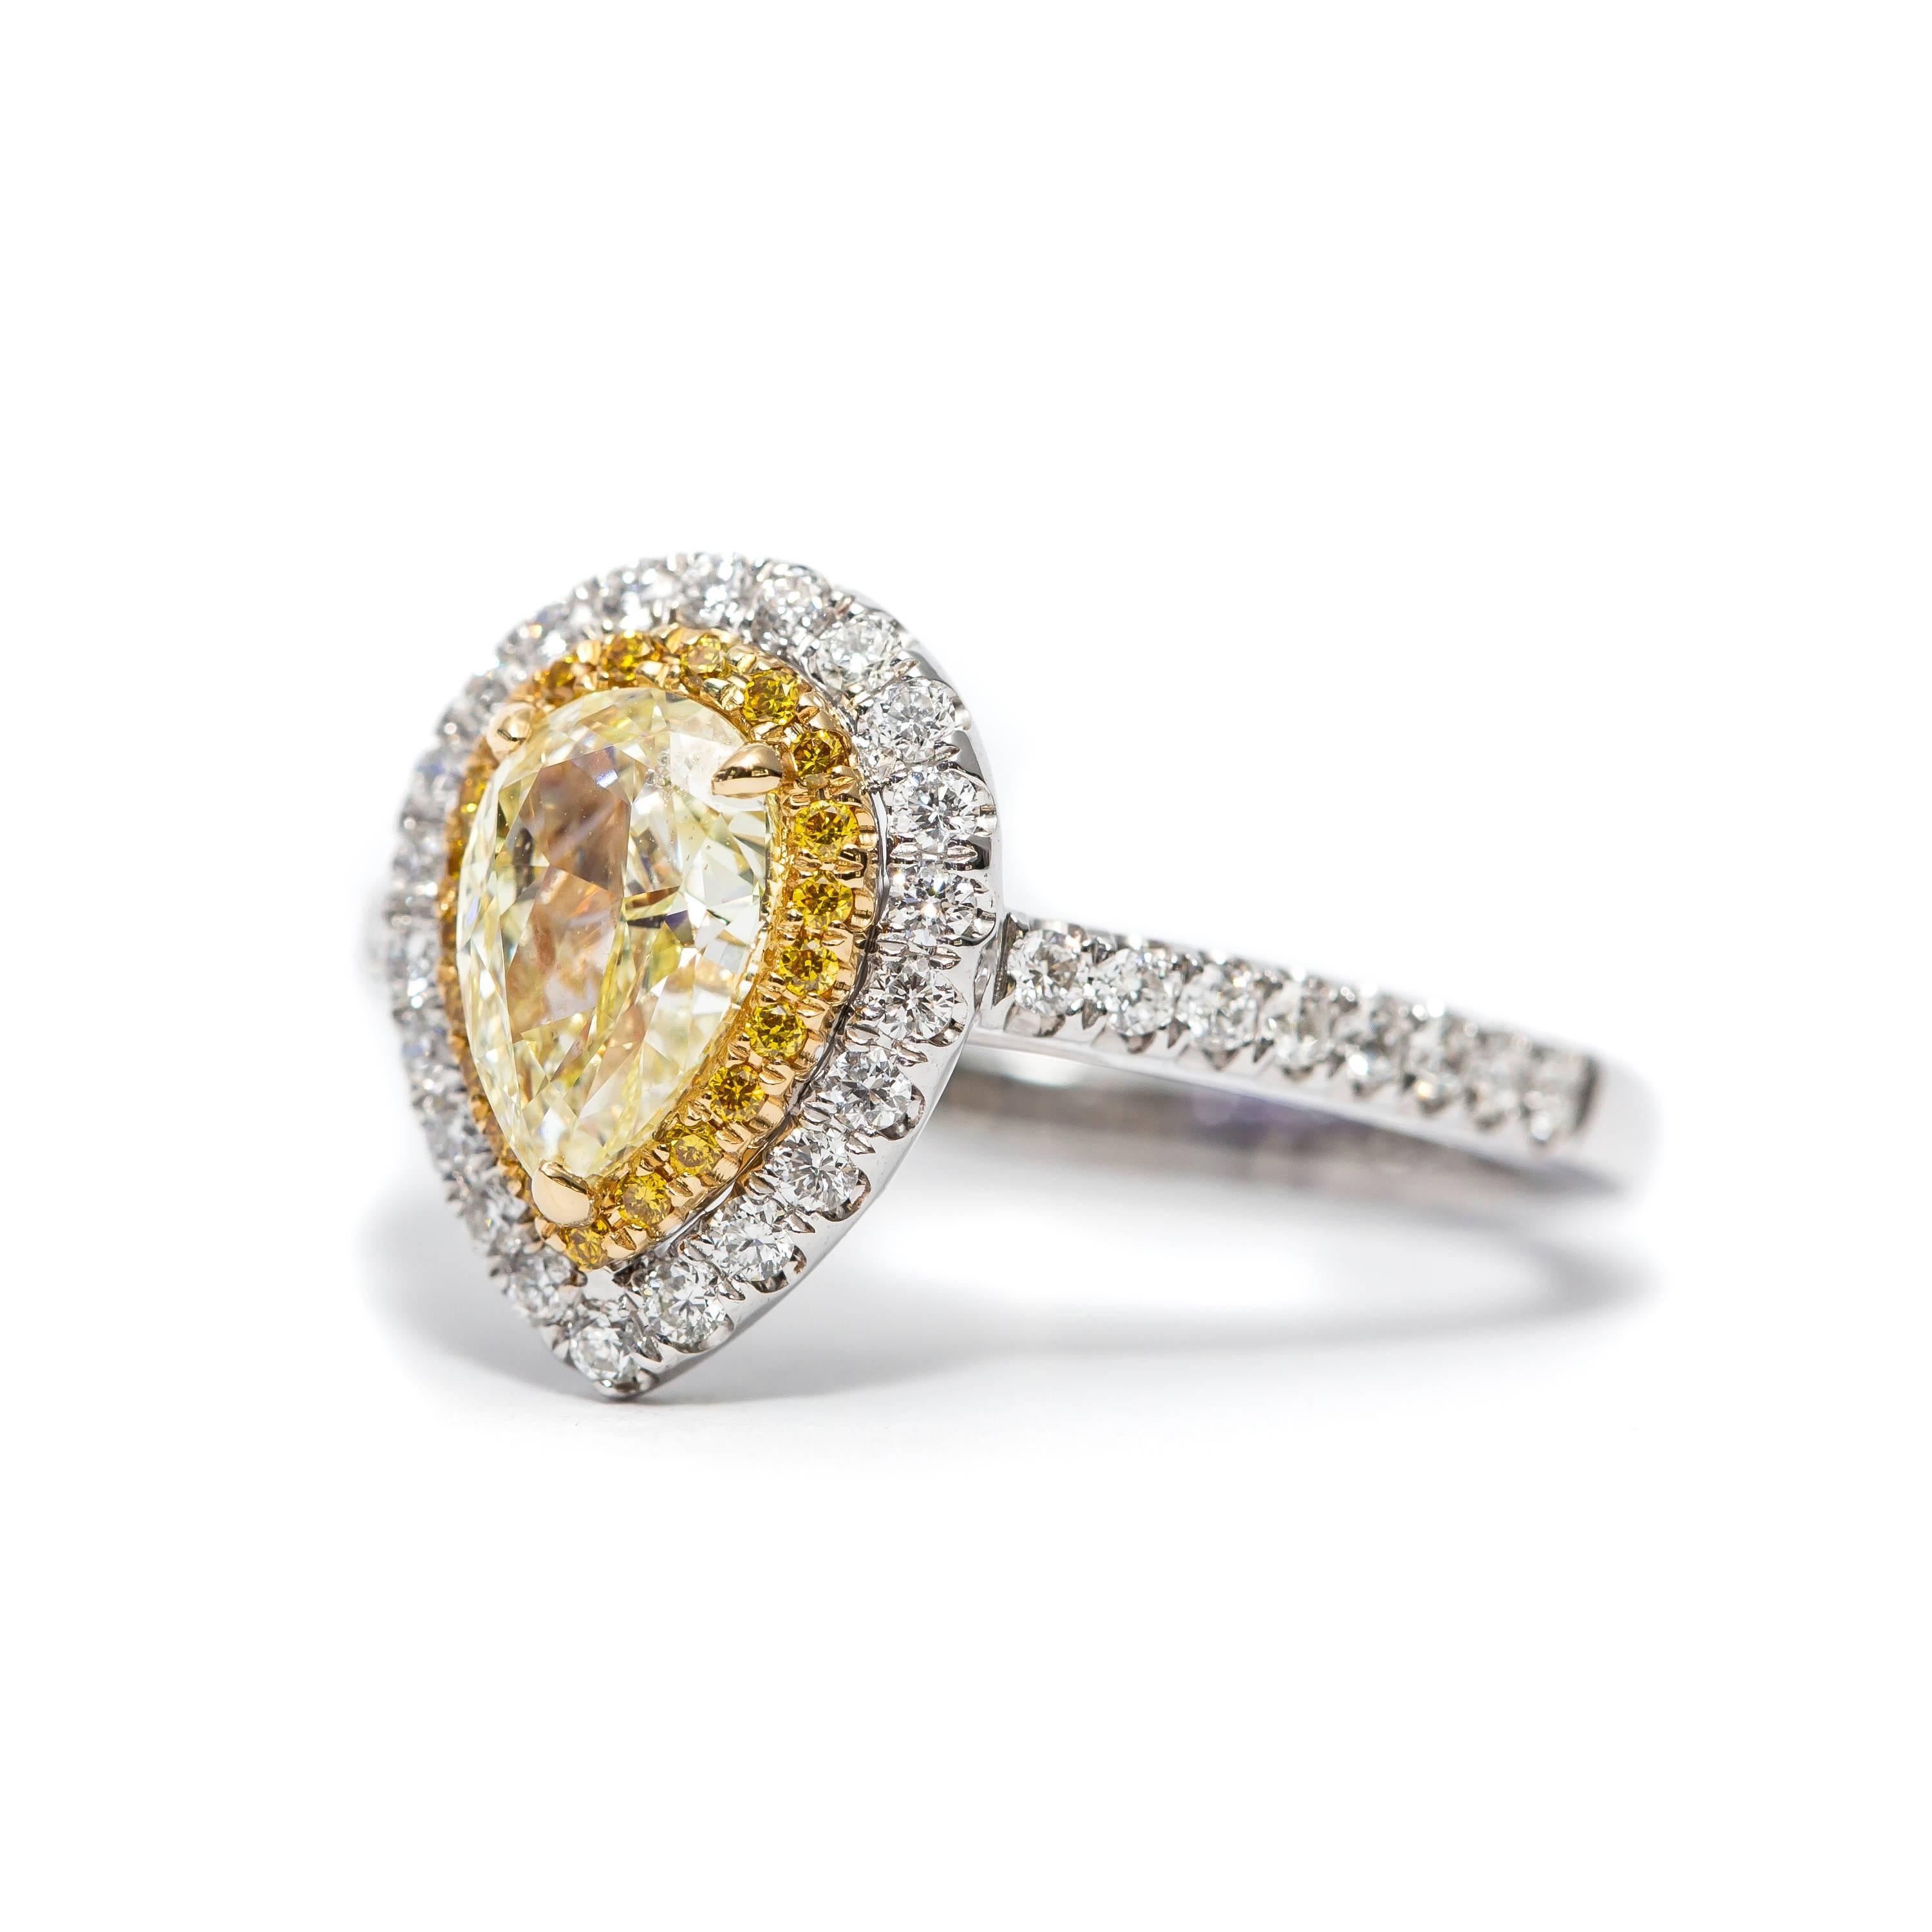 This Stunning bespoke GIA Certified 0.87 Carat Natural Fancy Light Yellow Pear Shaped Diamond which is set in the center of the Ring with Double Halo, the inner halo features 0.08 Carat Round Fancy Yellow Diamonds with 0.38 Carat Color G/H White